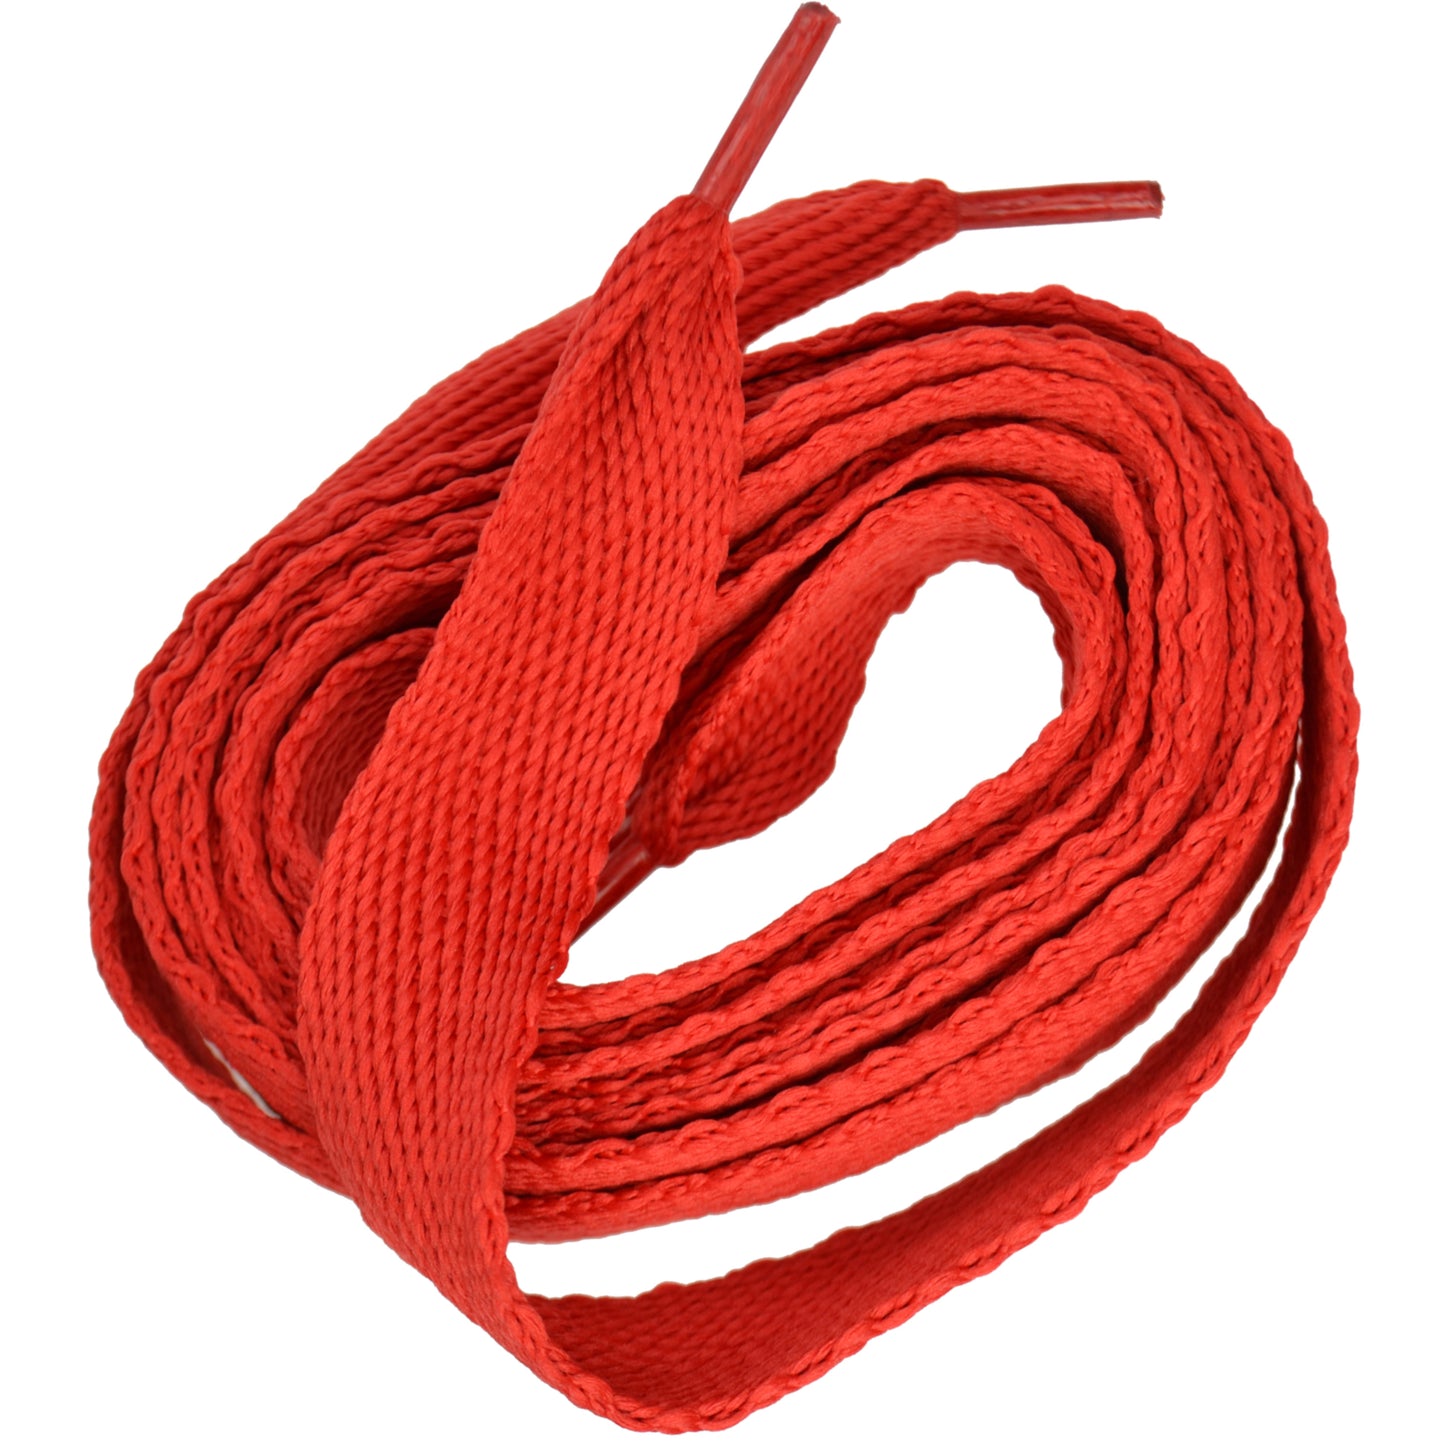 130cm Flat Shoe Laces - Flame red - 20mm